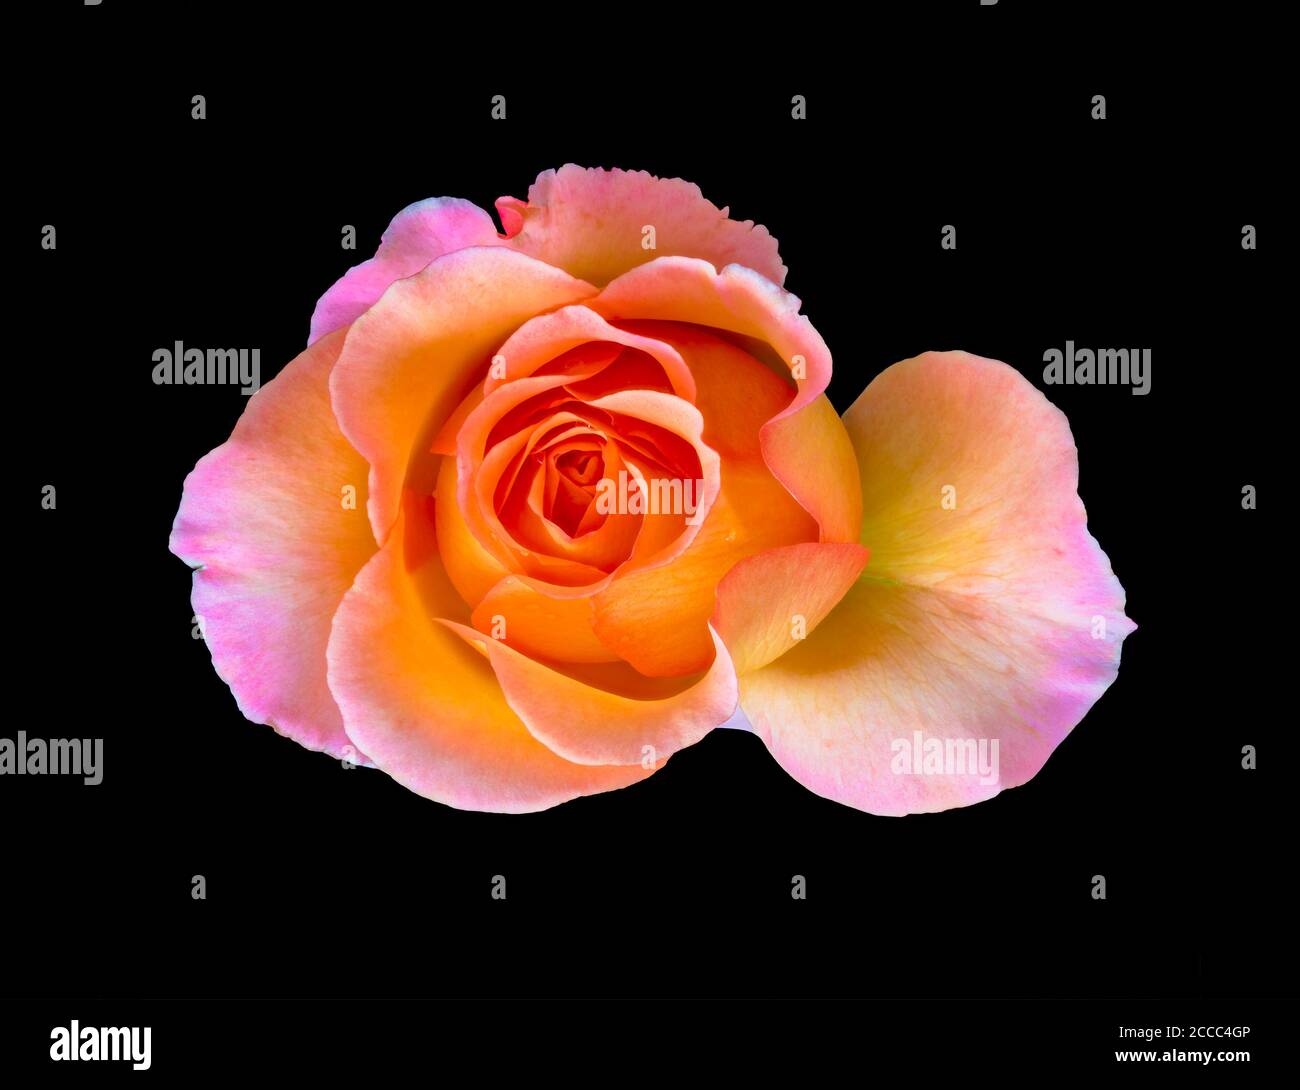 Retro veined rose top view macro of a single isolated orange yellow pink blossom in painting style on black background Stock Photo